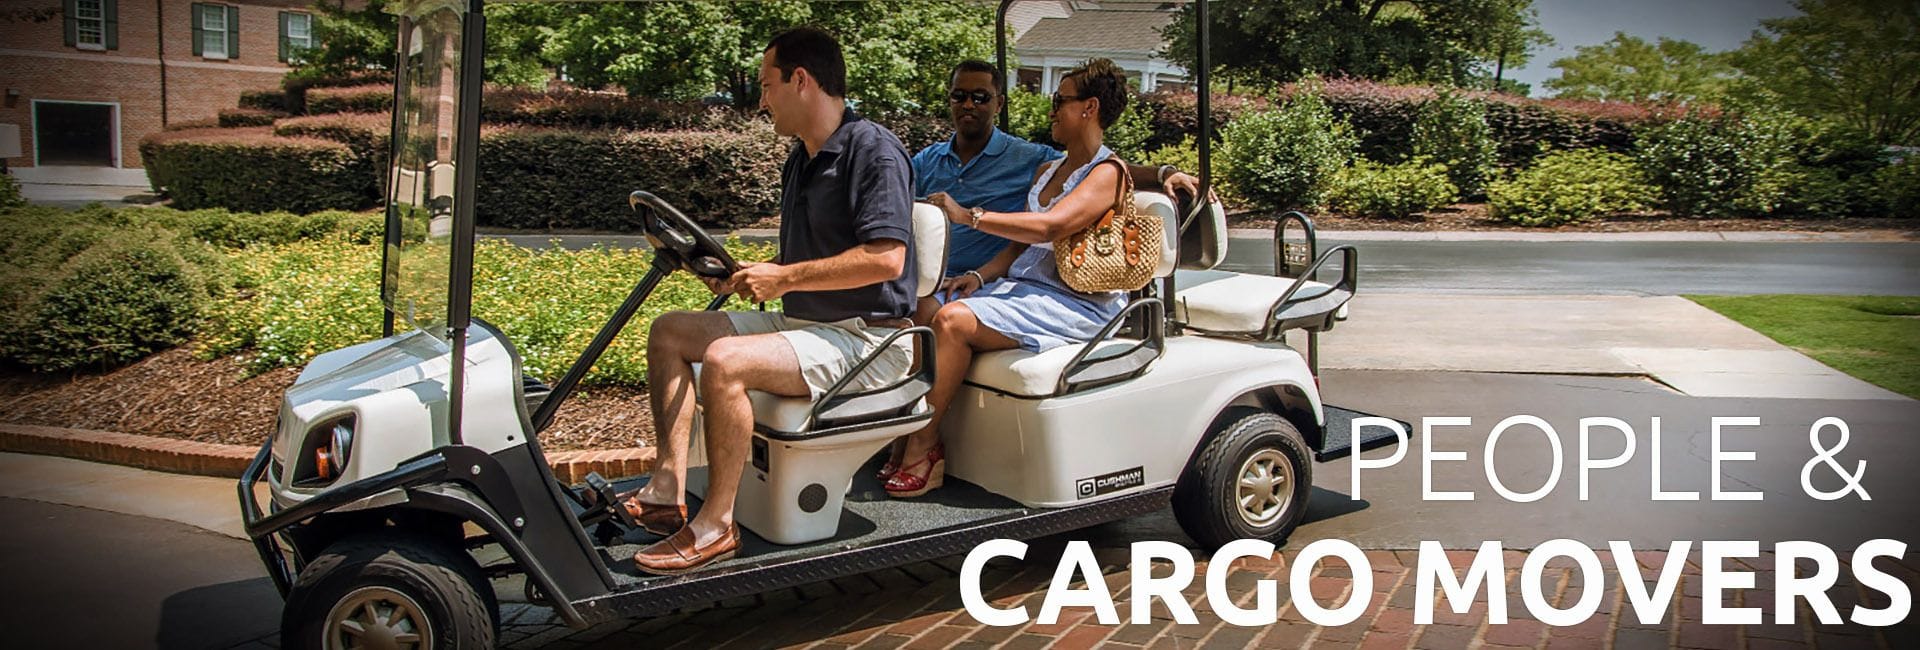 New People and Cargo Mover Vehicles | Golf Car World 